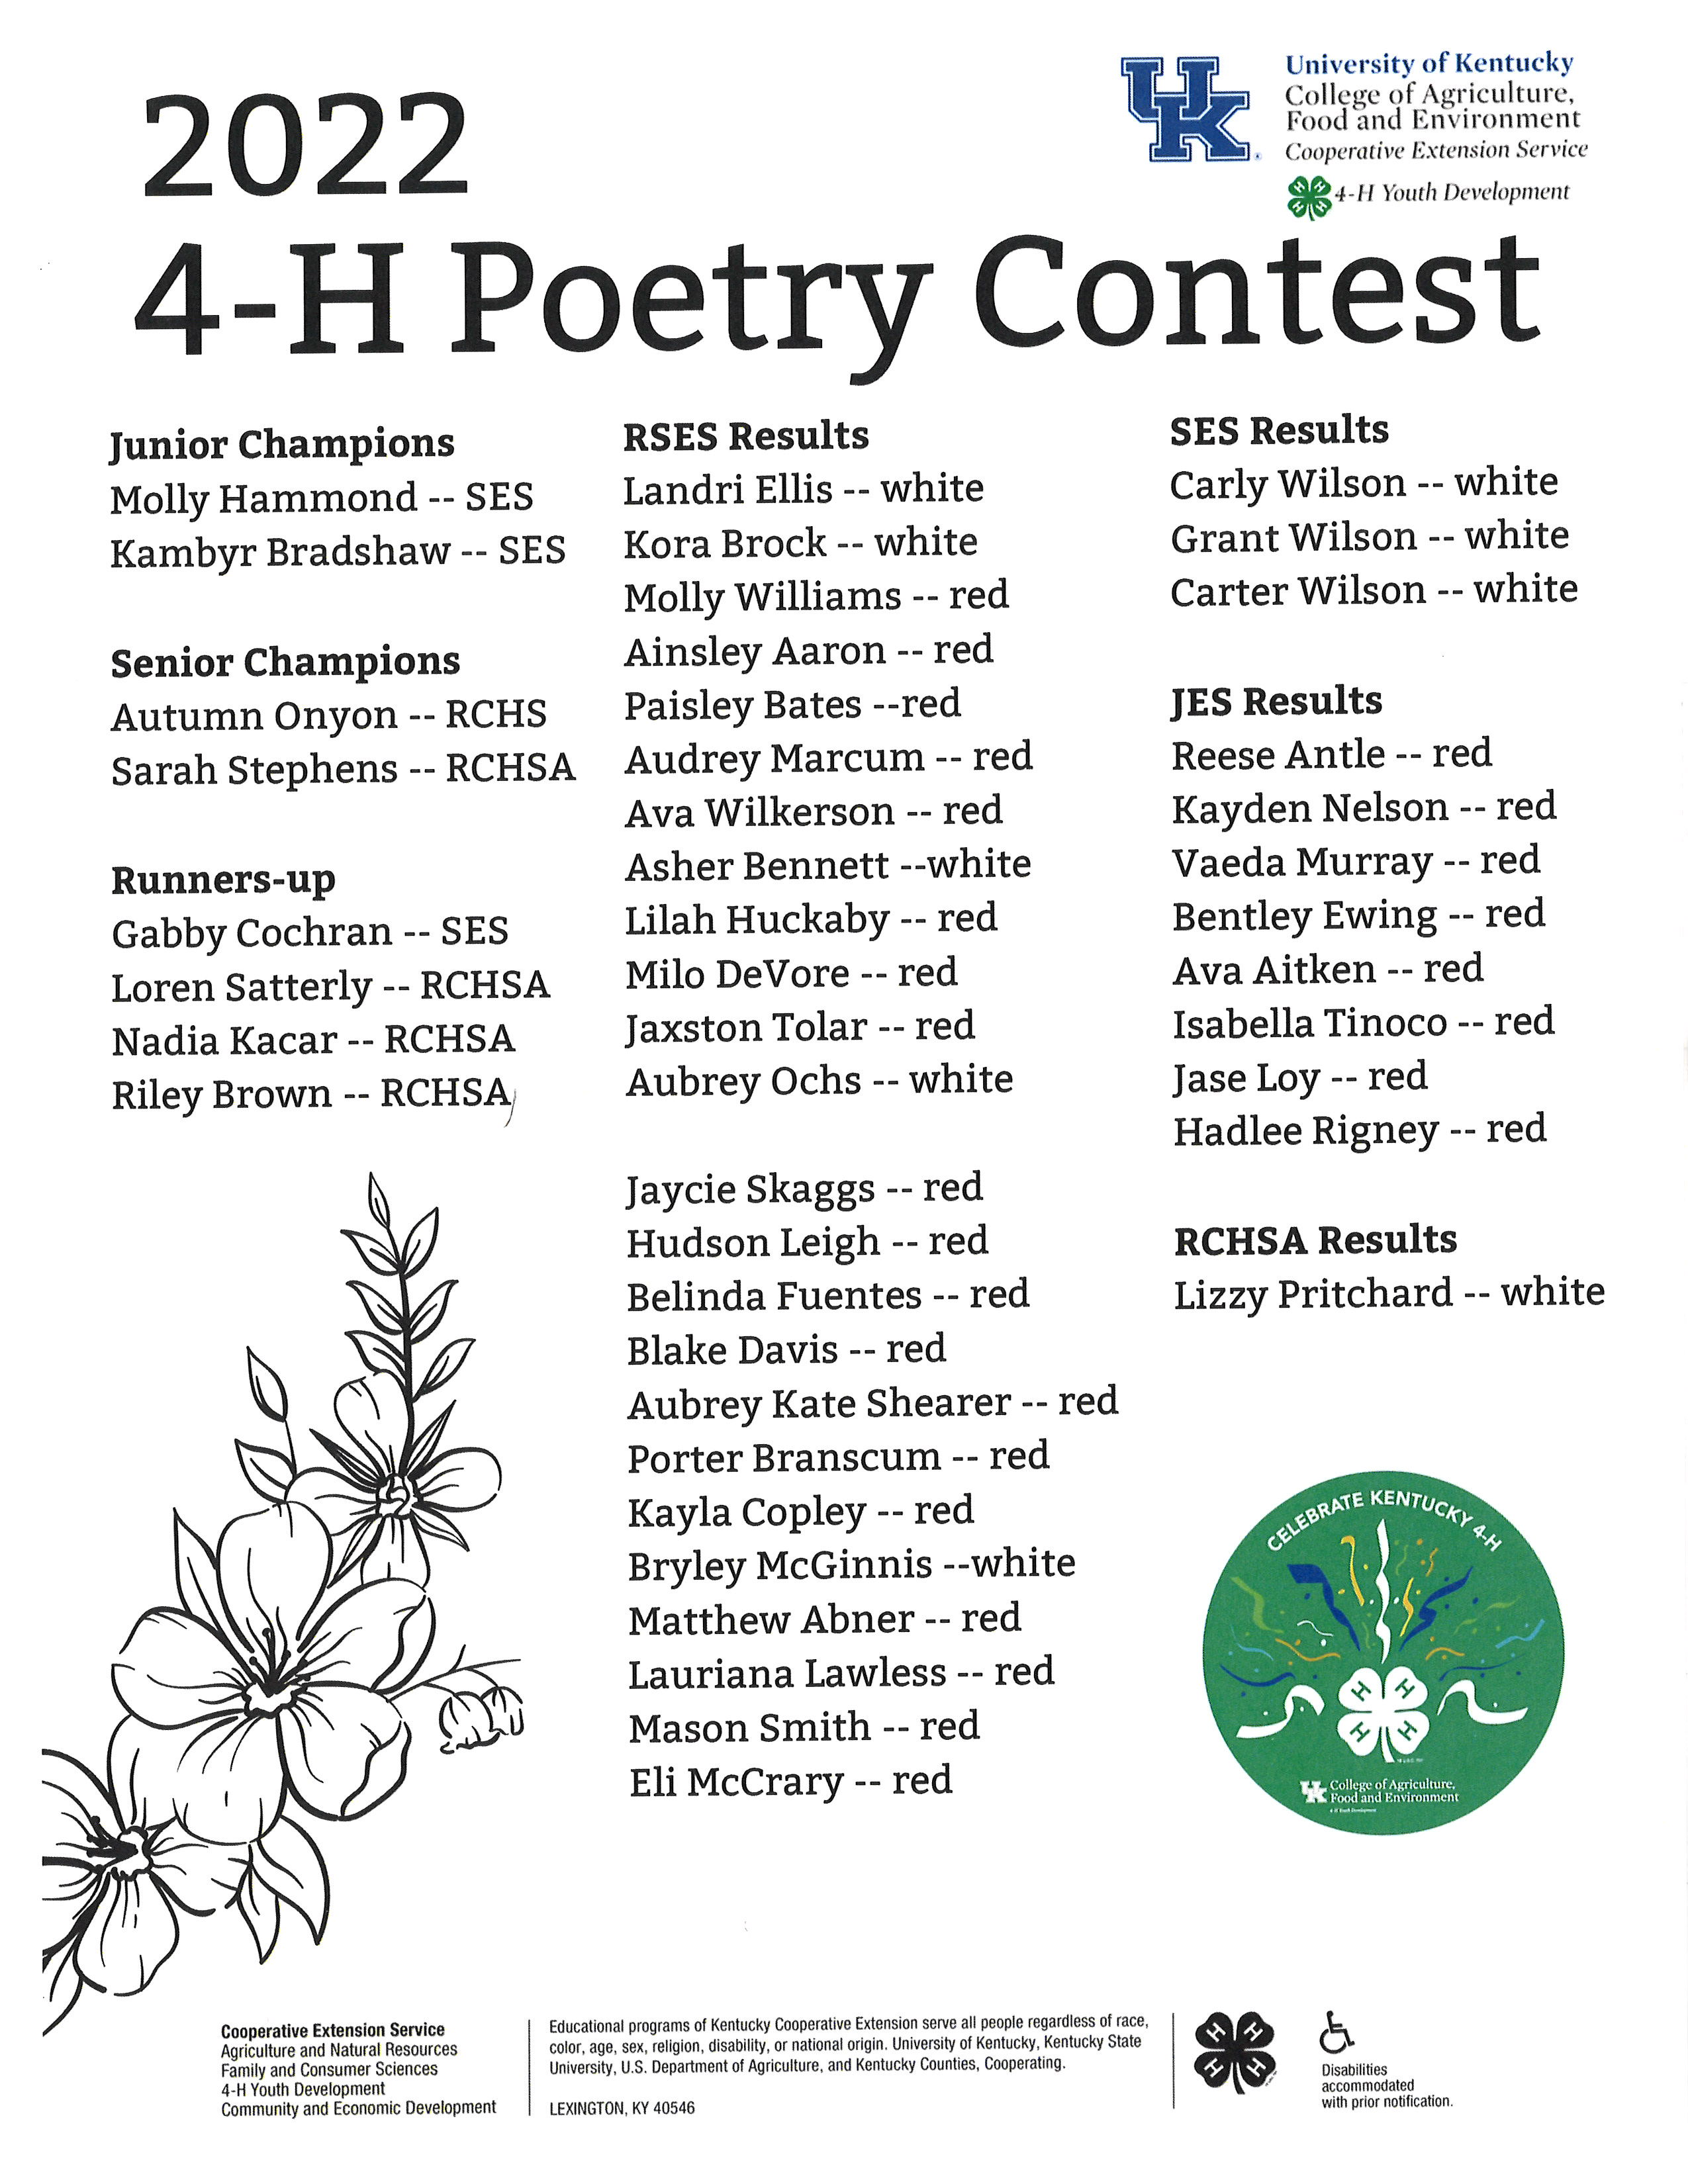 2022 4-H Poetry Contest Results